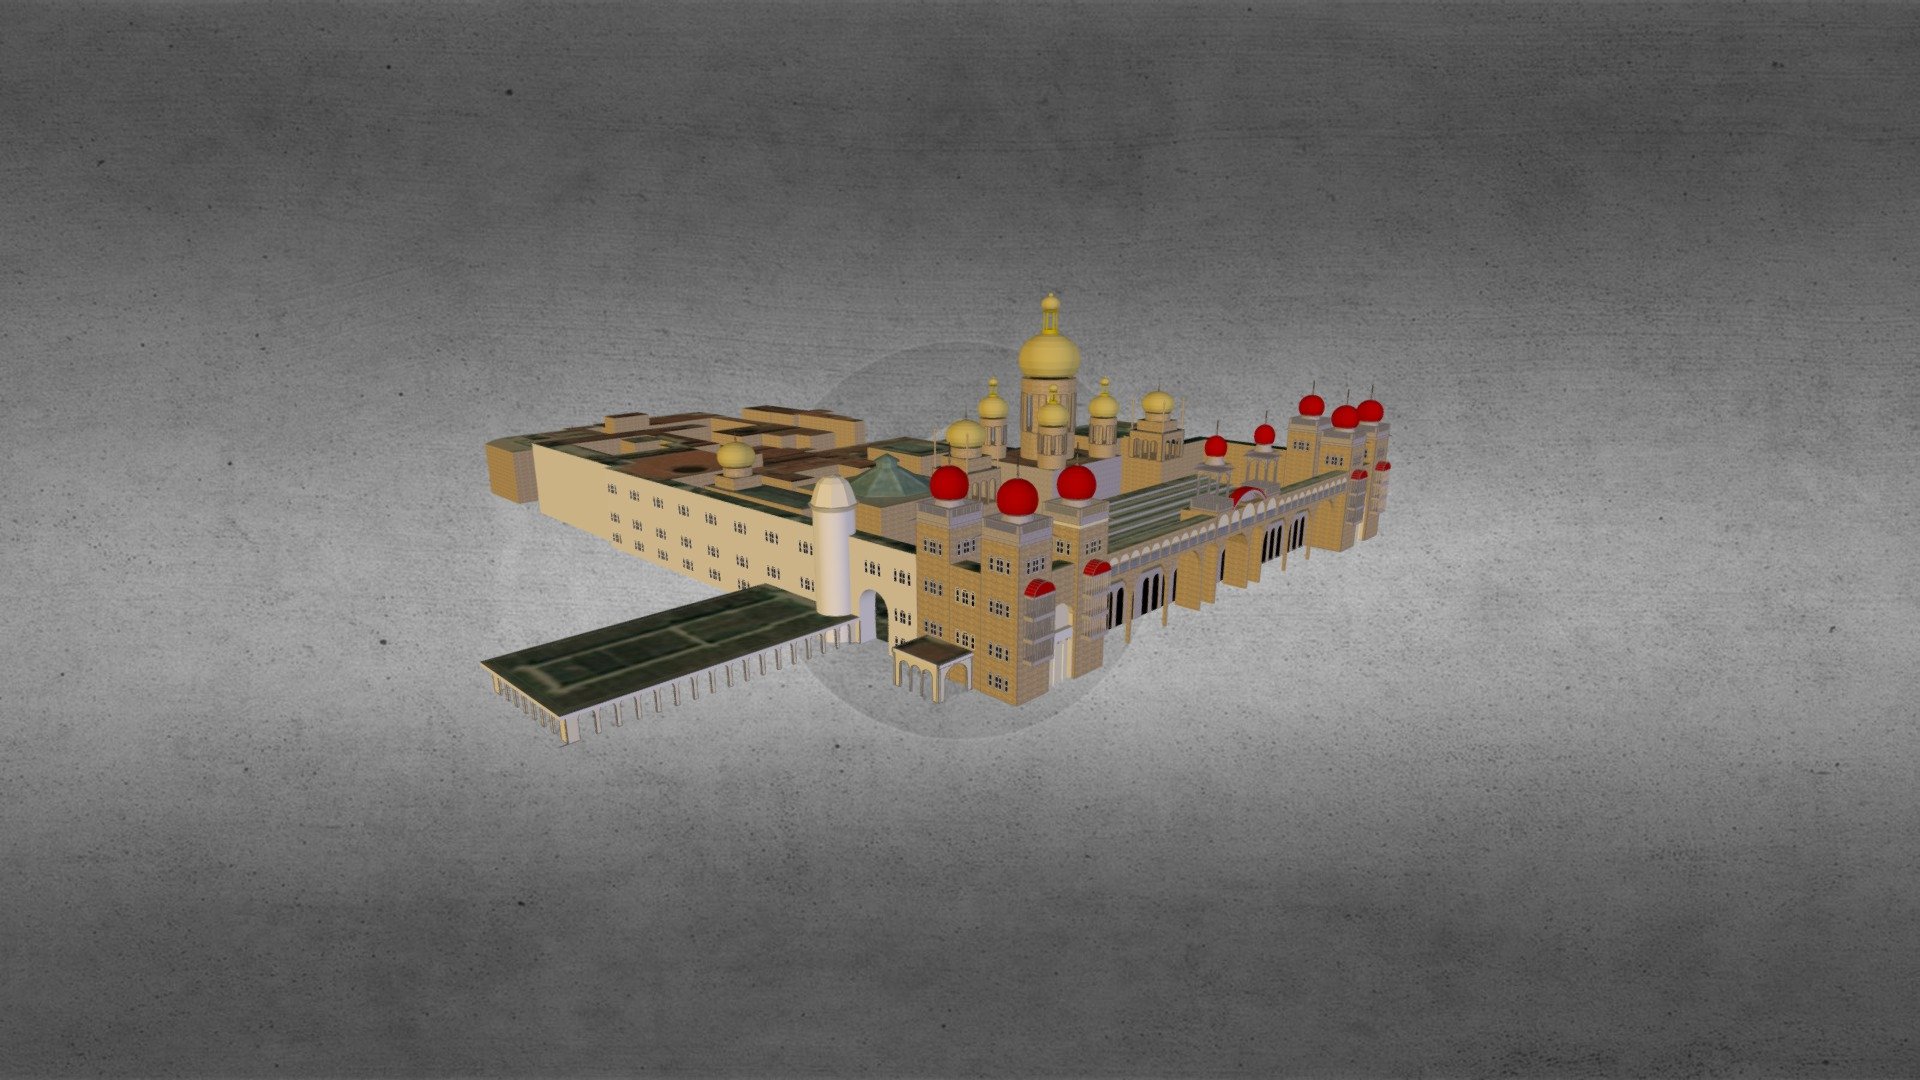 The Mysore Palace in Mysore India.  This model was generated from 4 photographs and Google Imagery - Mysore Palace - 3D model by ryangarnett 3d model